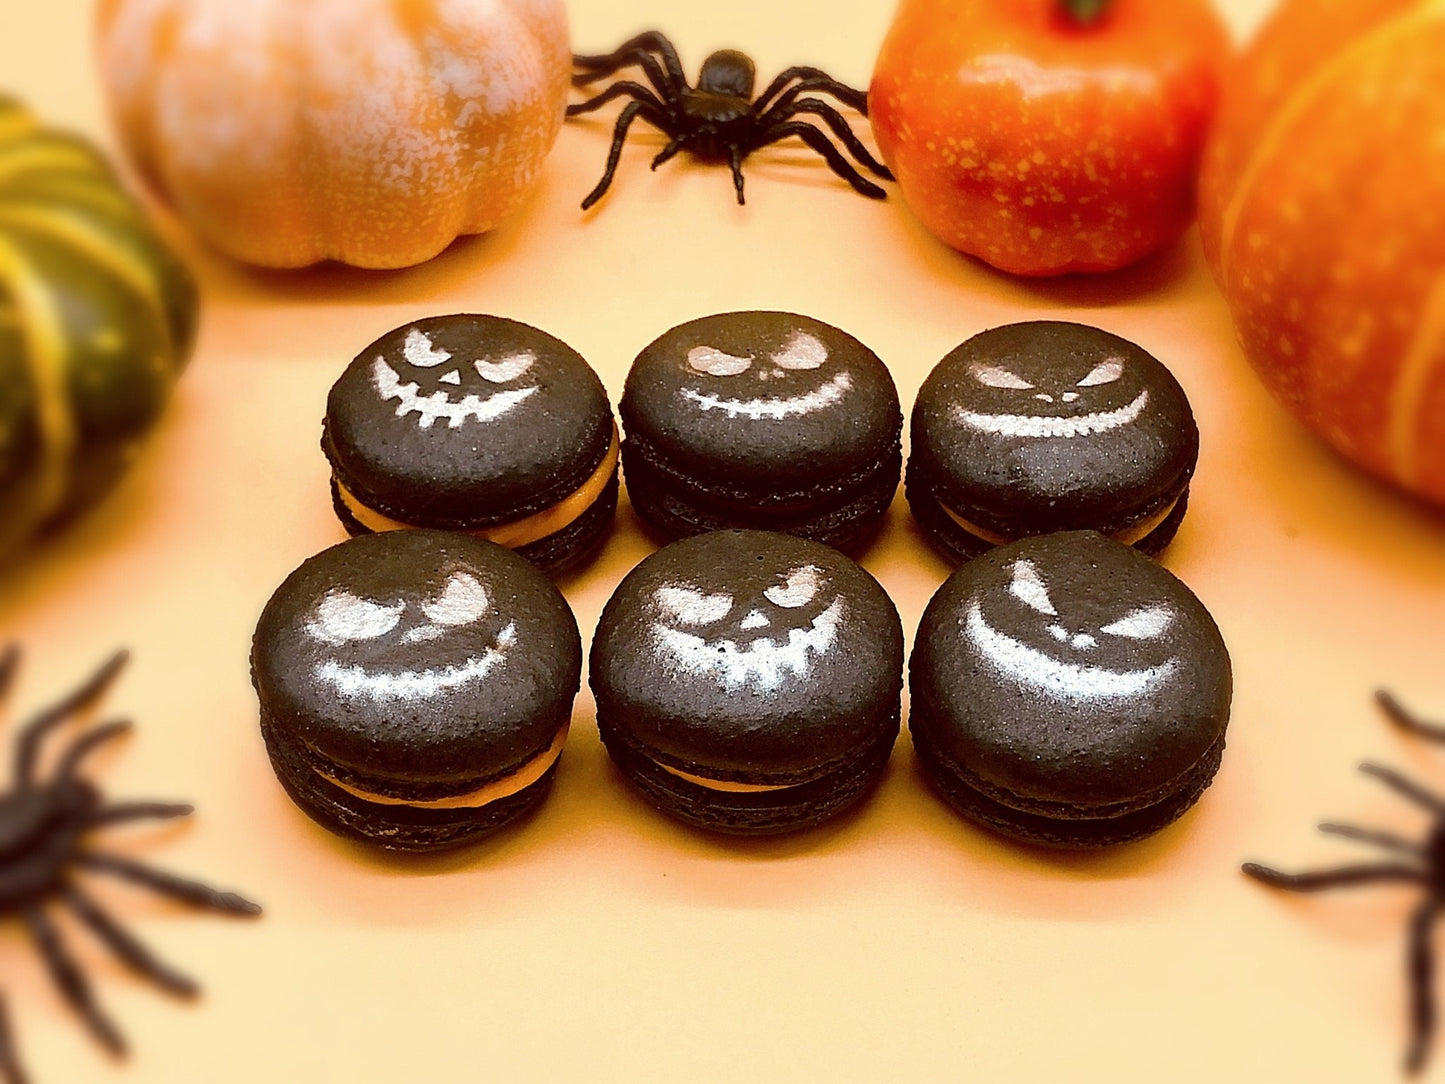 Halloween French Macaron Set | Ideal for celebratory events. - Macaron Centrale6 Pack